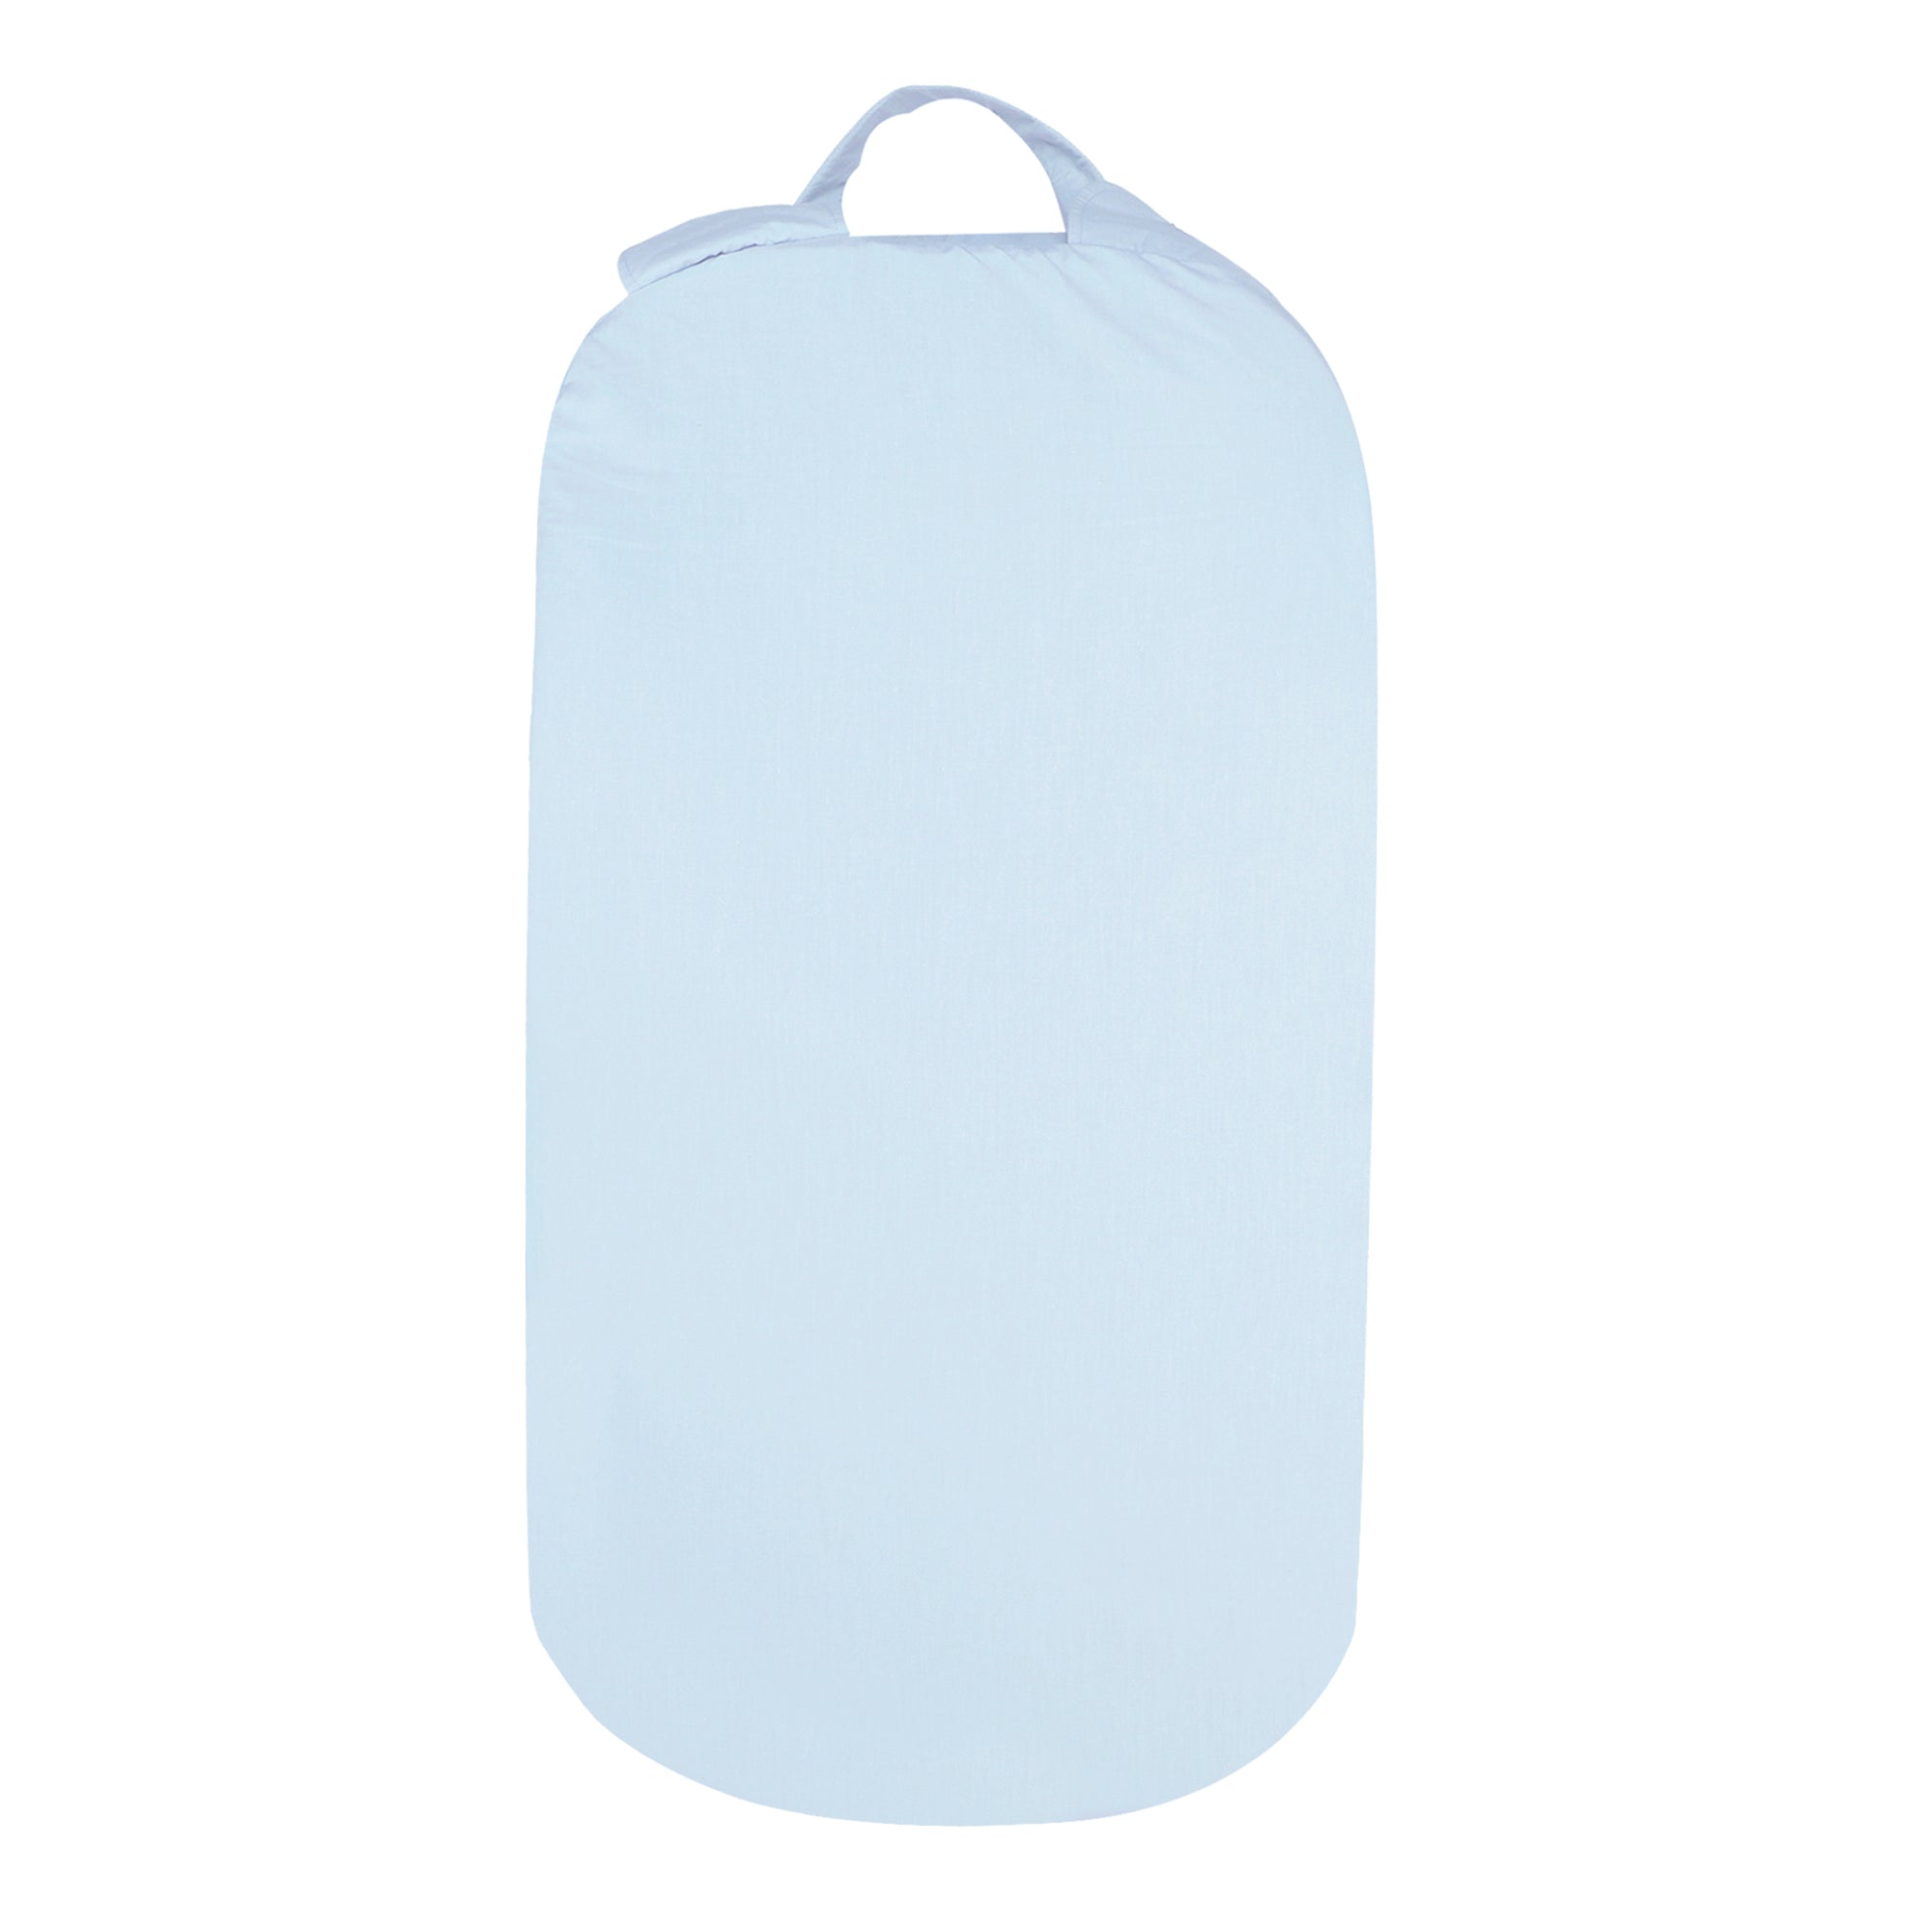 BABY BLUE CARRY NEST - TULO BABY